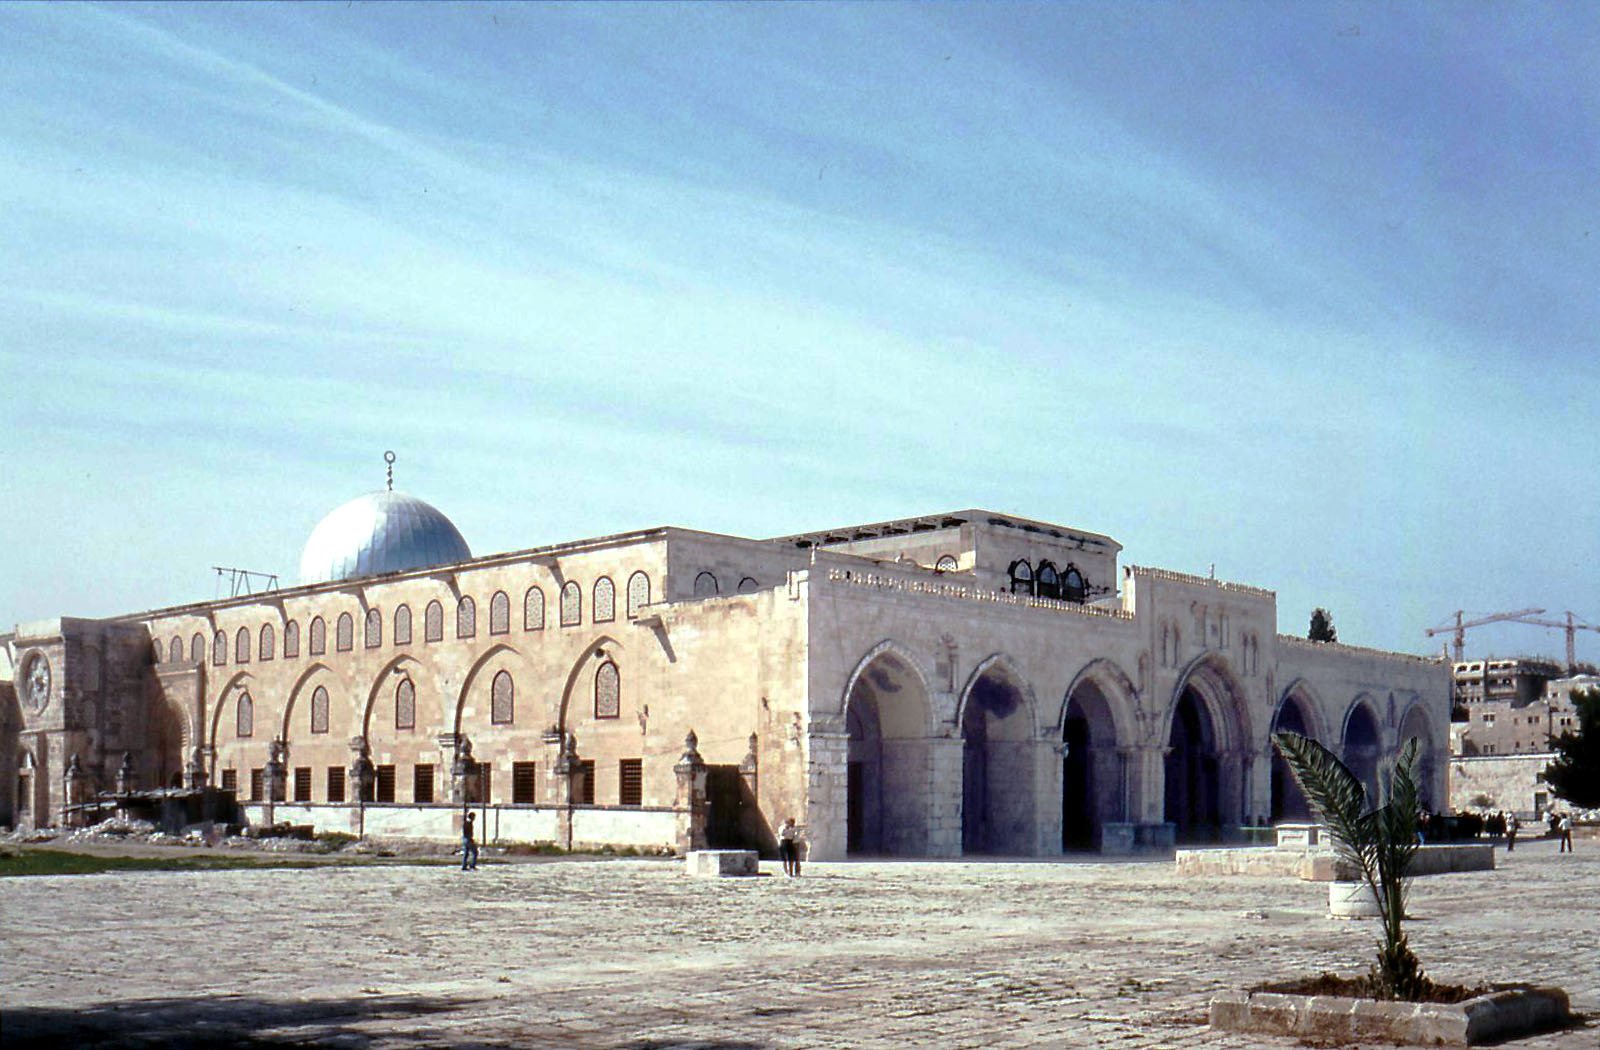 Al aqsa moschee 2 1 - Pictures of Holy Places